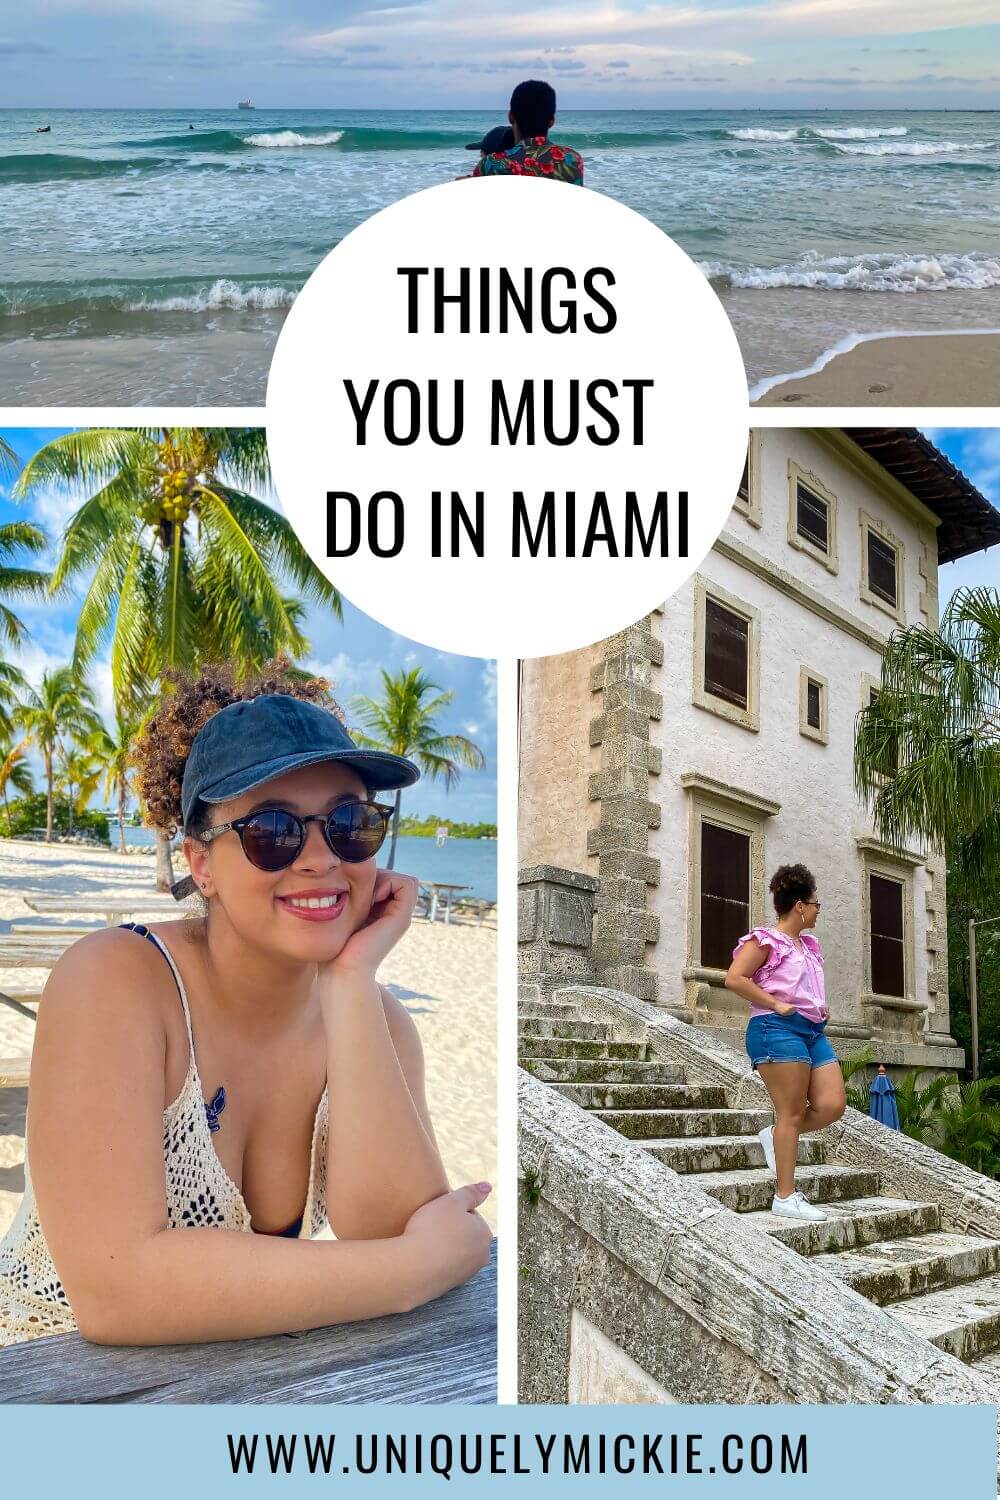 Heading to Miami soon for spring break or a winter getaway? Take a look at my Miami Travel Guide. Hopefully it gives you some ideas on what to do, see, and eat while visiting the colorful city. #miami #thingstodoinmiami #miamitravelguide #7daysinmiami 